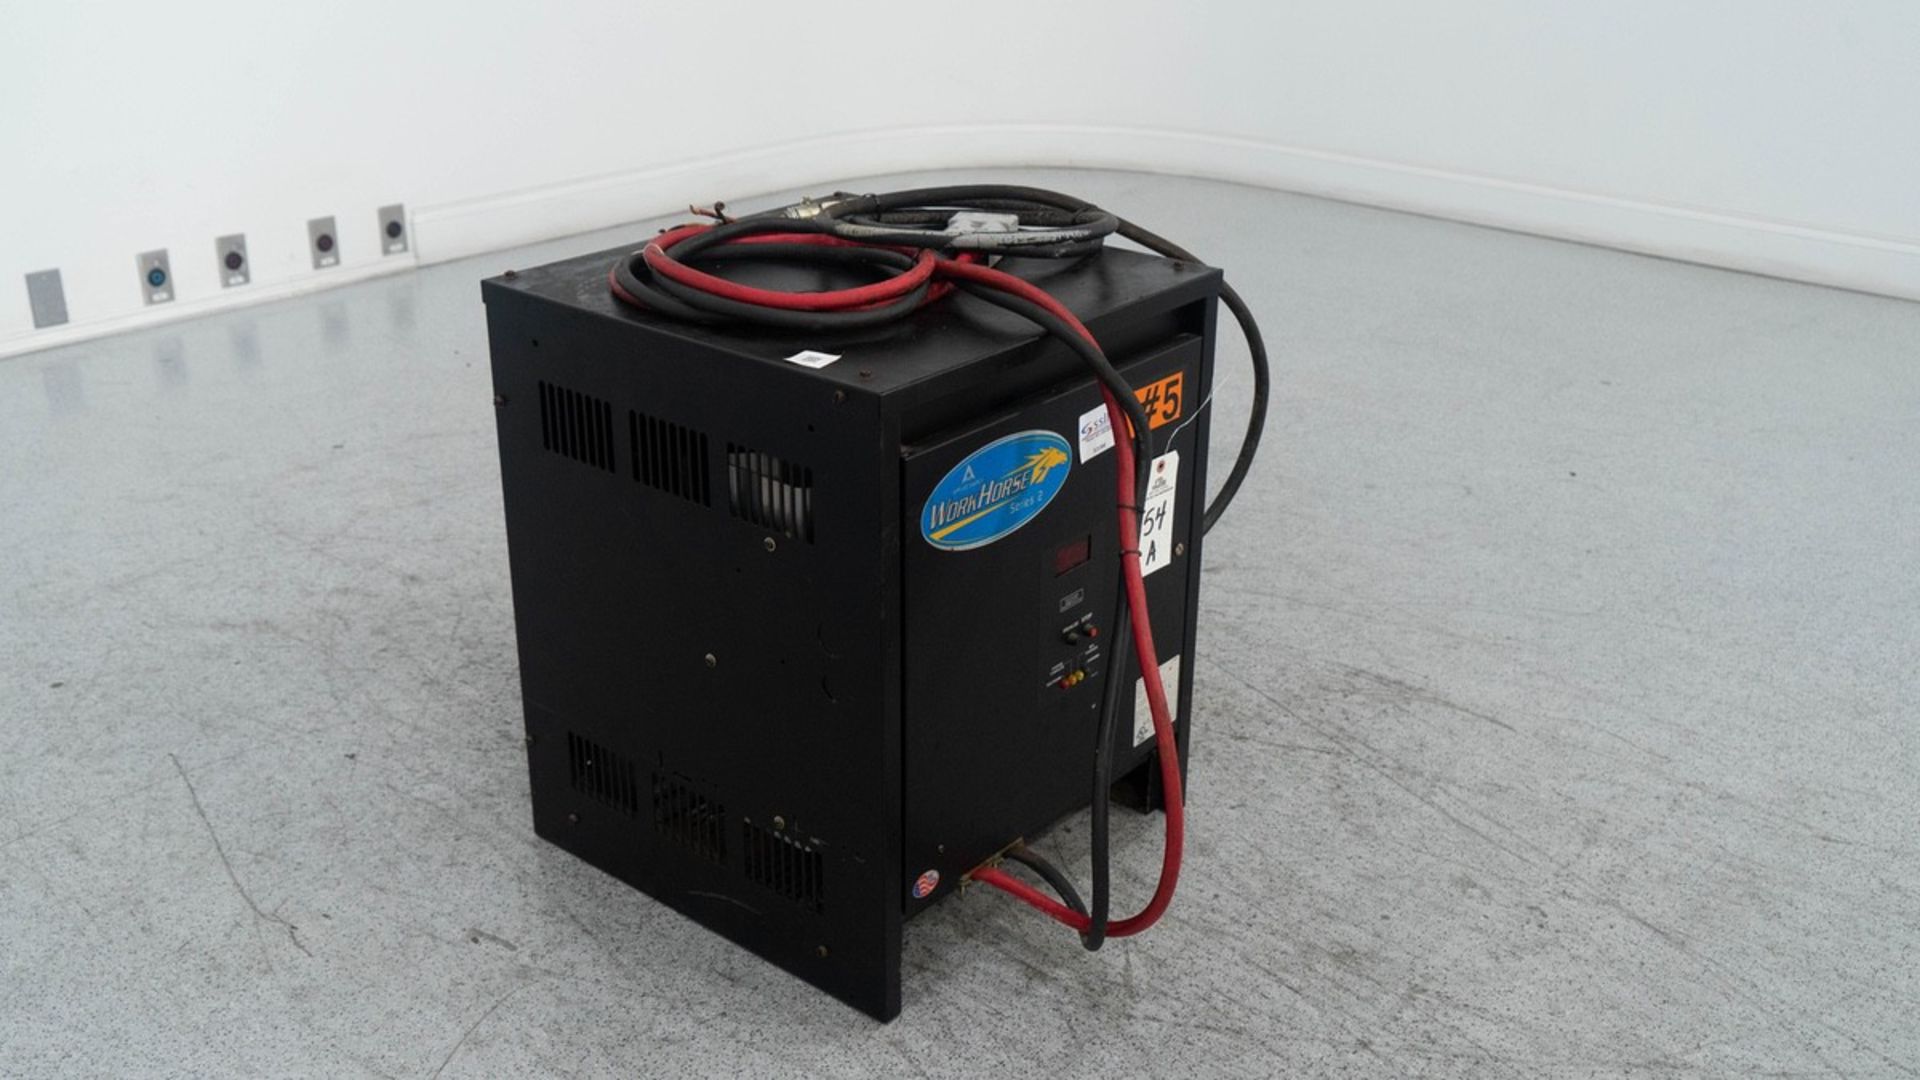 Applied Energy Workhorse Series 2 Battery Charger, Model 18R750E3D, S/N: 08U54536, | Rig Fee: $25 - Image 2 of 4